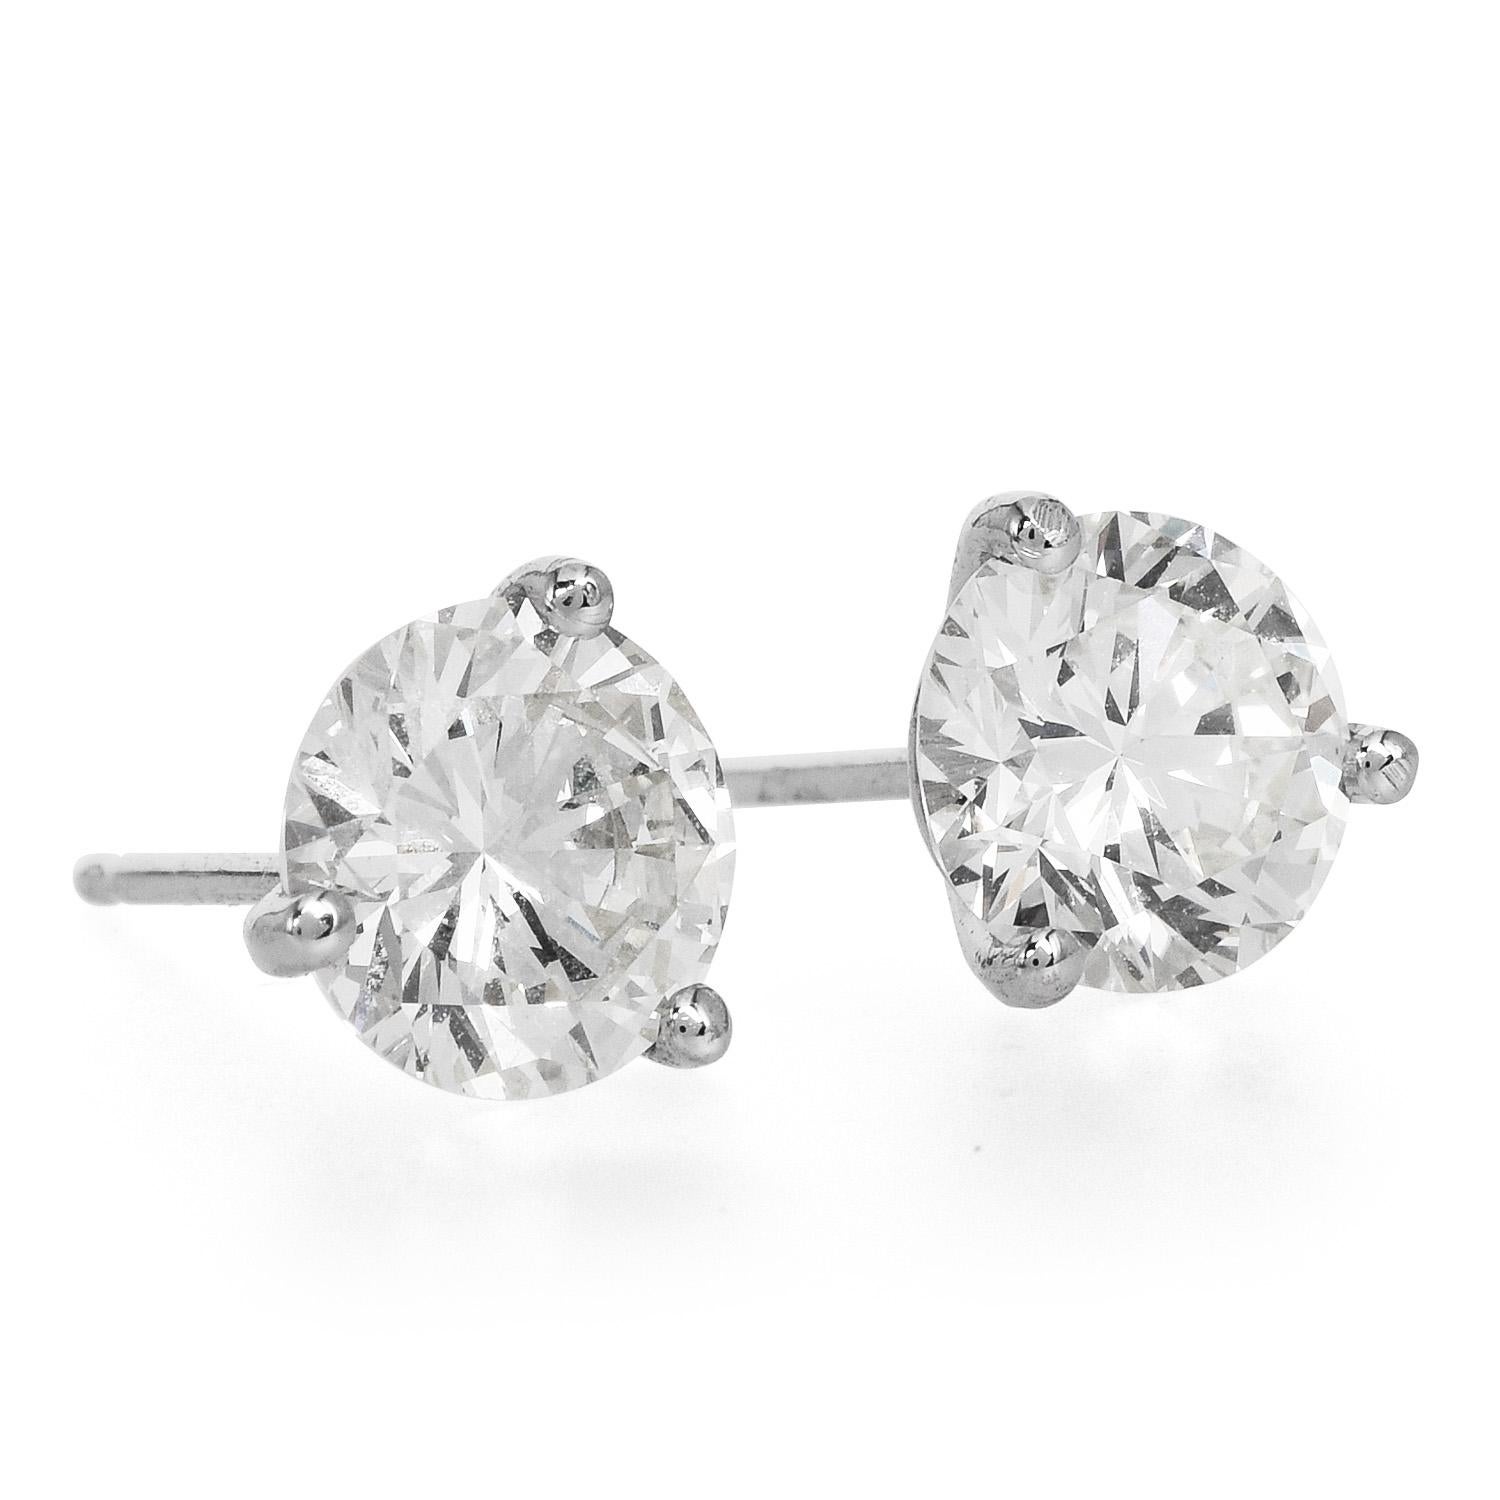 Estate 2.45 Carats Round Diamond 18K White Gold Martini Set Stud Earrings In Excellent Condition For Sale In Miami, FL